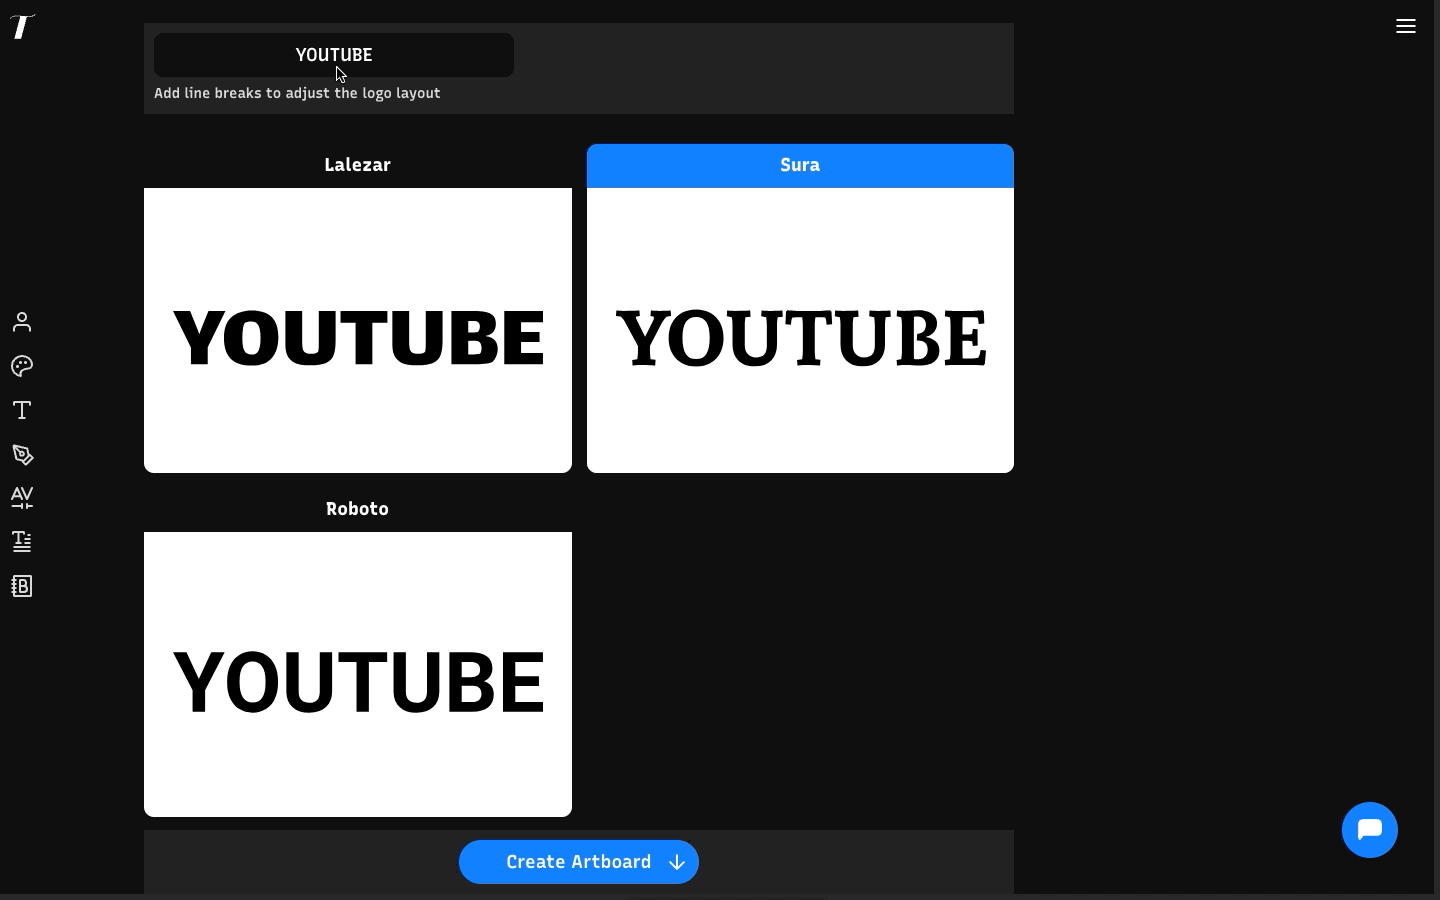 Multi-Lines logo layout feature 